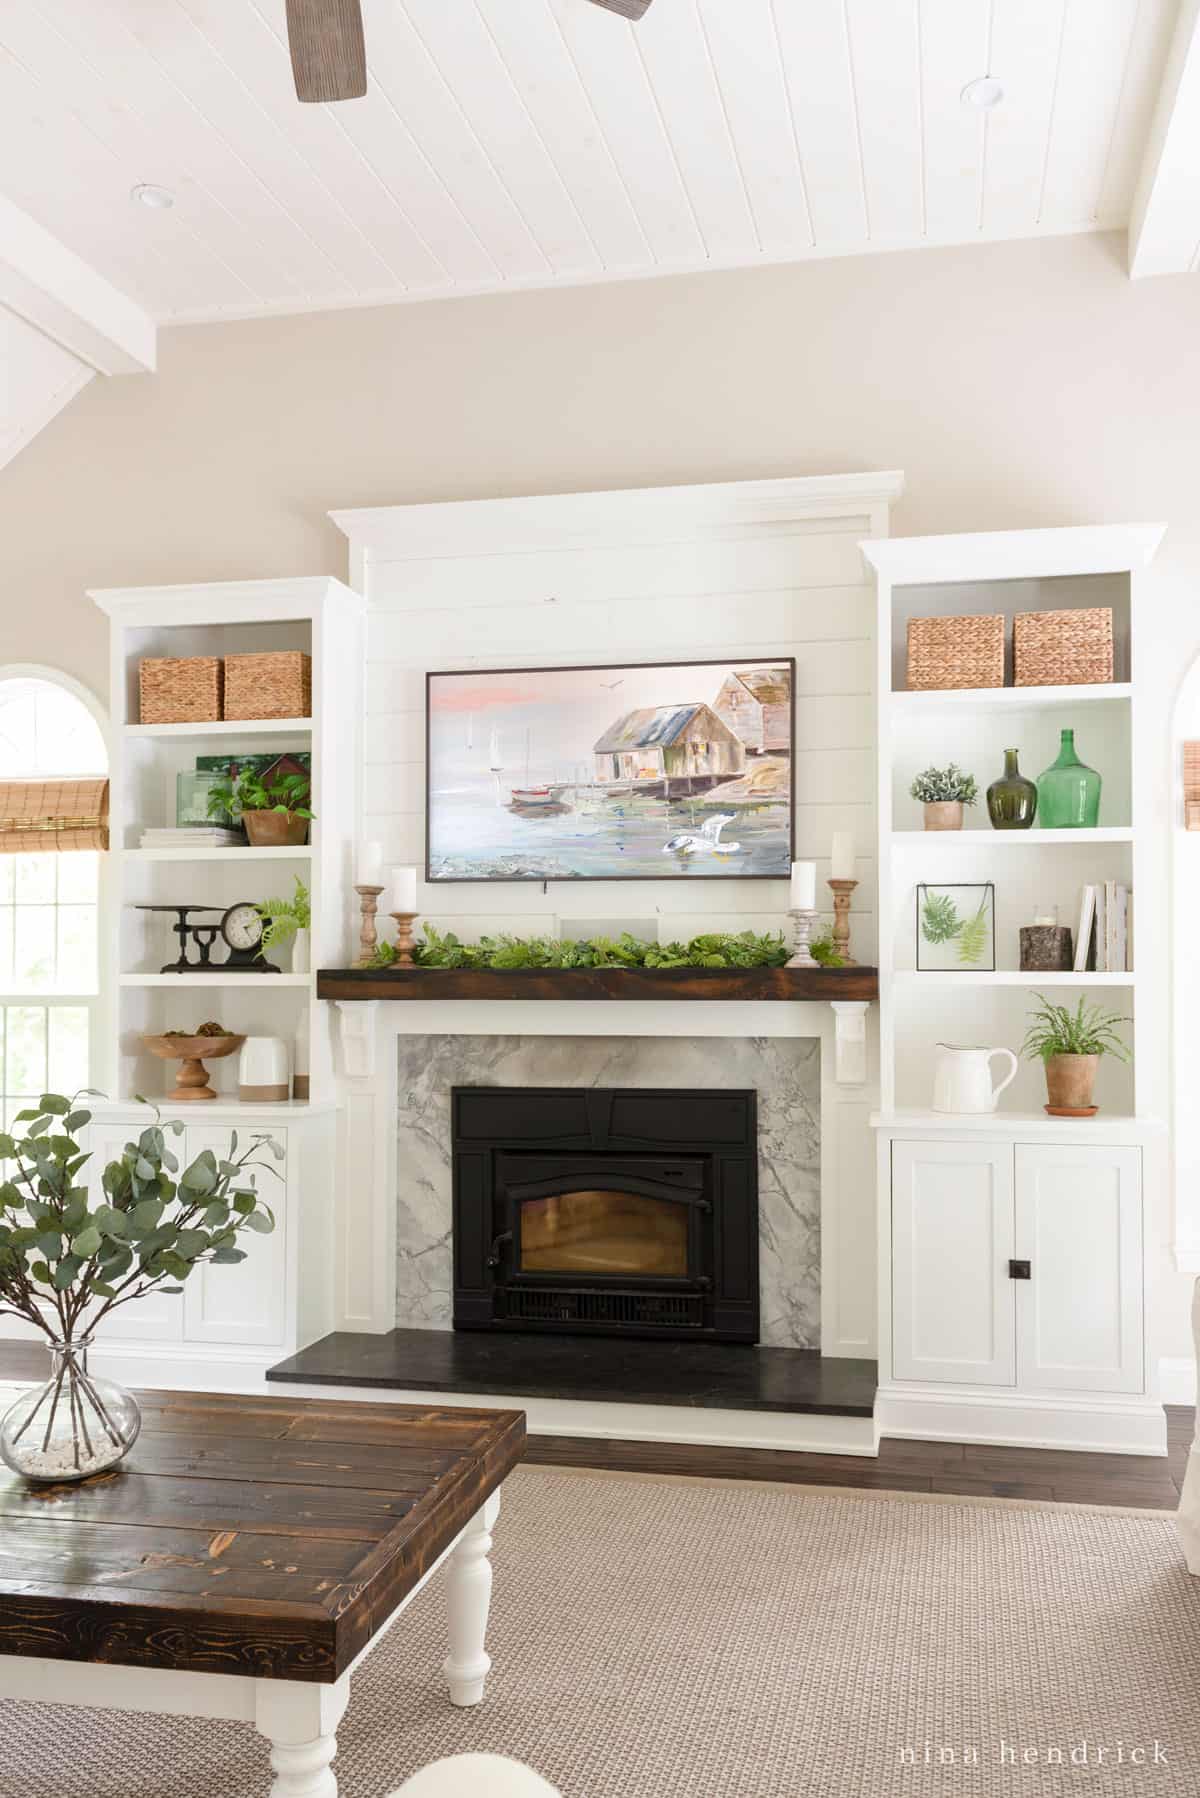 White Fireplace built-in surround with rustic mantel and fern garland decor